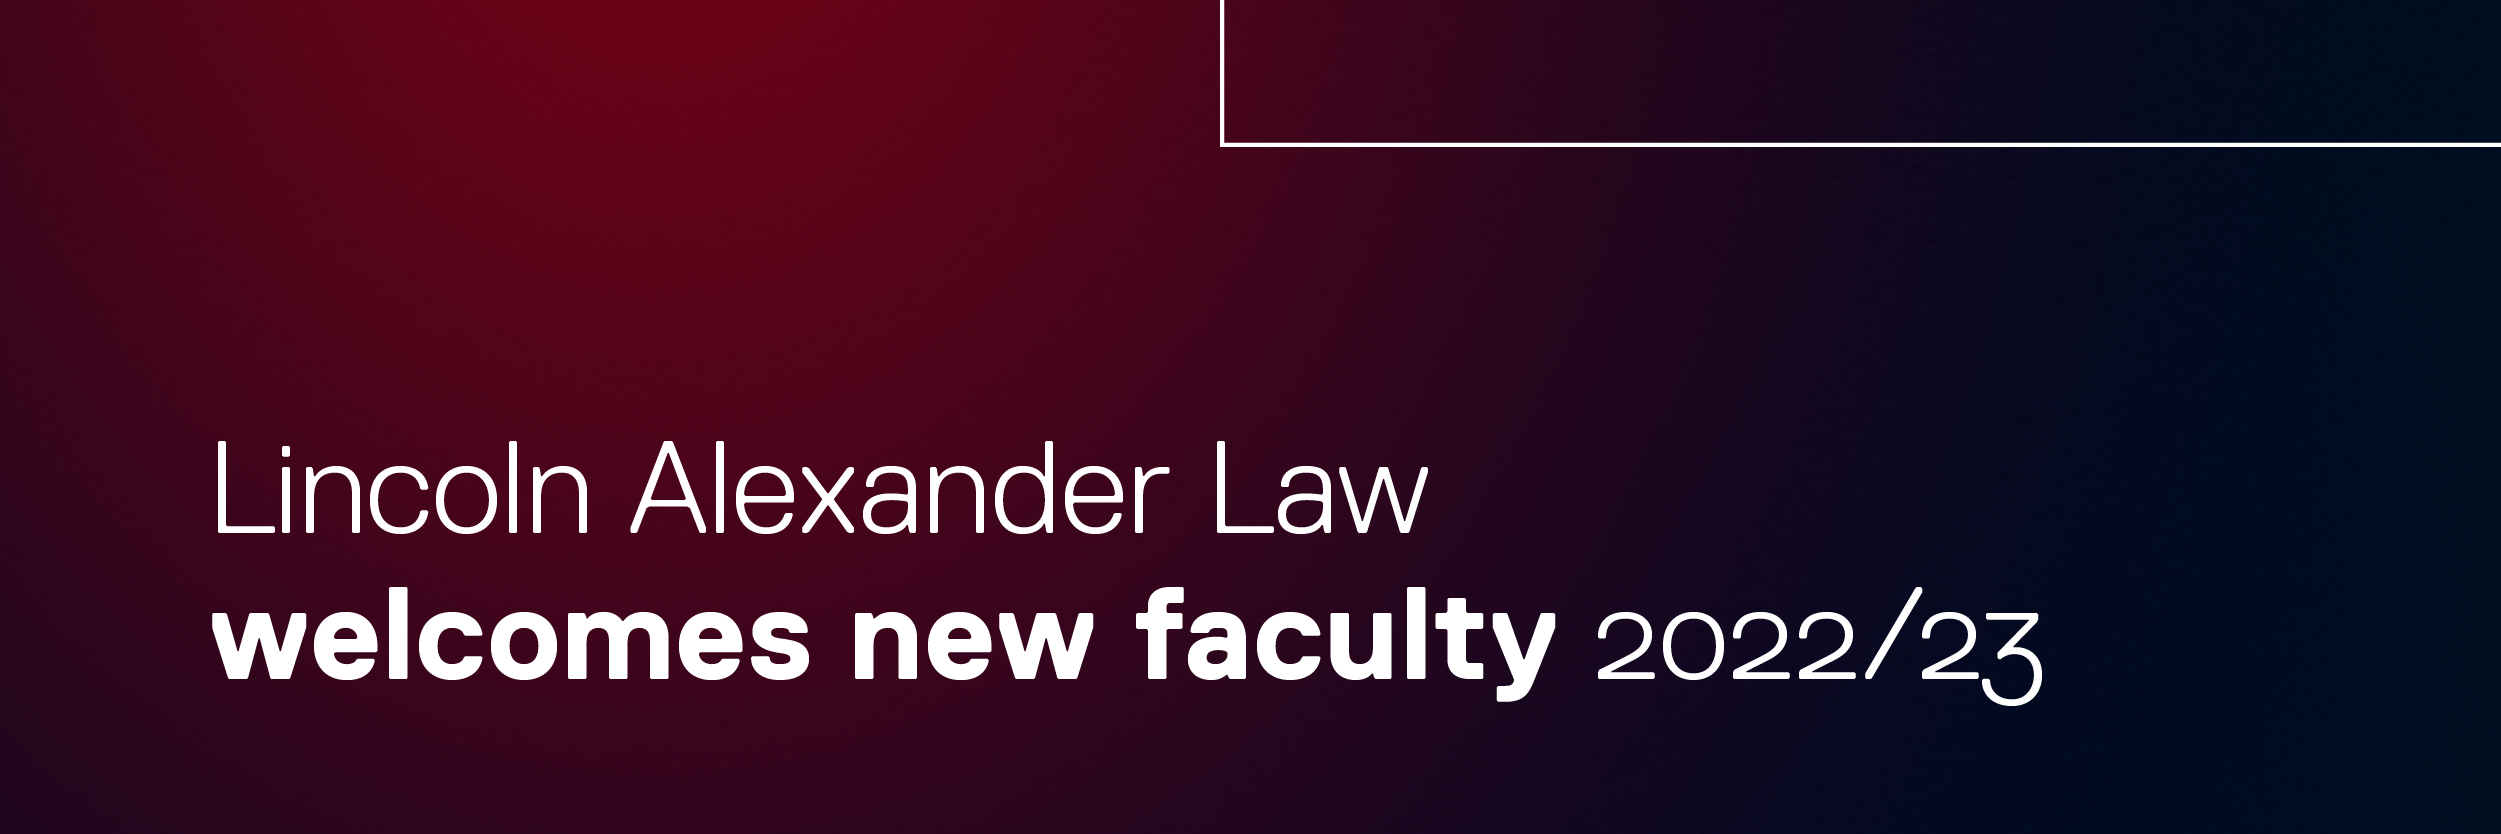 Lincoln Alexander Law welcomes new faculty 2022/23